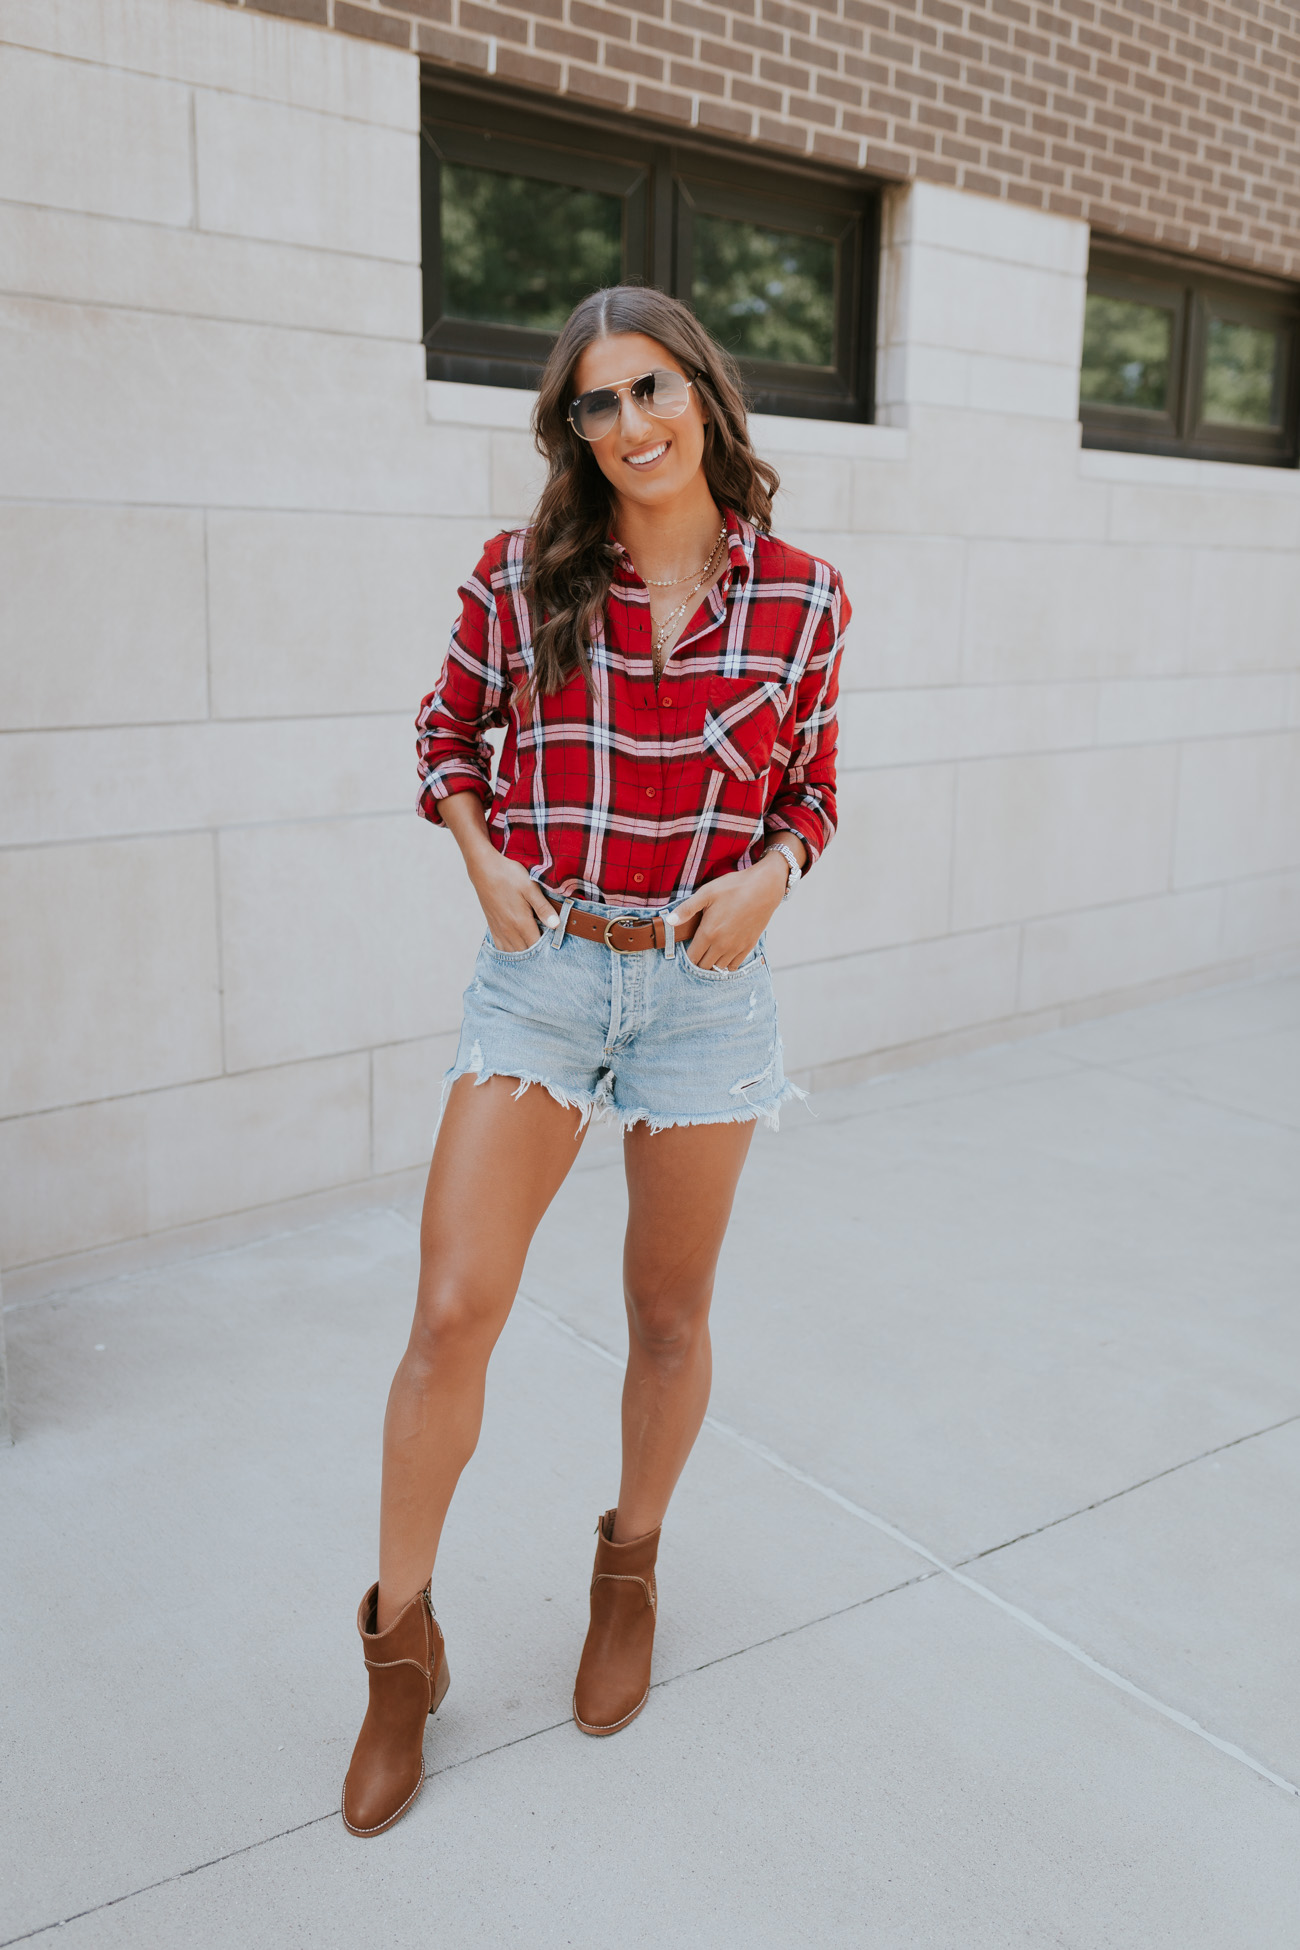 affordable plaid shirt, plaid tops, plaid shirt nsale, 2018 nordstrom anniversary sale public access, shop nordstrom, nordstrom shoes, nordstrom dresses, nordstrom handbag sale, nordstrom anniversary sale dates, Nordstrom Anniversary Sale 2018, nordstrom anniversary sale picks, nordstrom anniversary sale catalog, sale picks for nordstrom anniversary sale 2018, information on nordstrom anniversary sale, nordstrom credit card, nordstrom debit card, nordstrom rewards, nordstrom sale, nordstrom anniversary sale finds, nsale finds, nsale picks, nike on sale, cute fall outfit, fall style, fall inspo, fall sale // grace wainwright a southern drawl